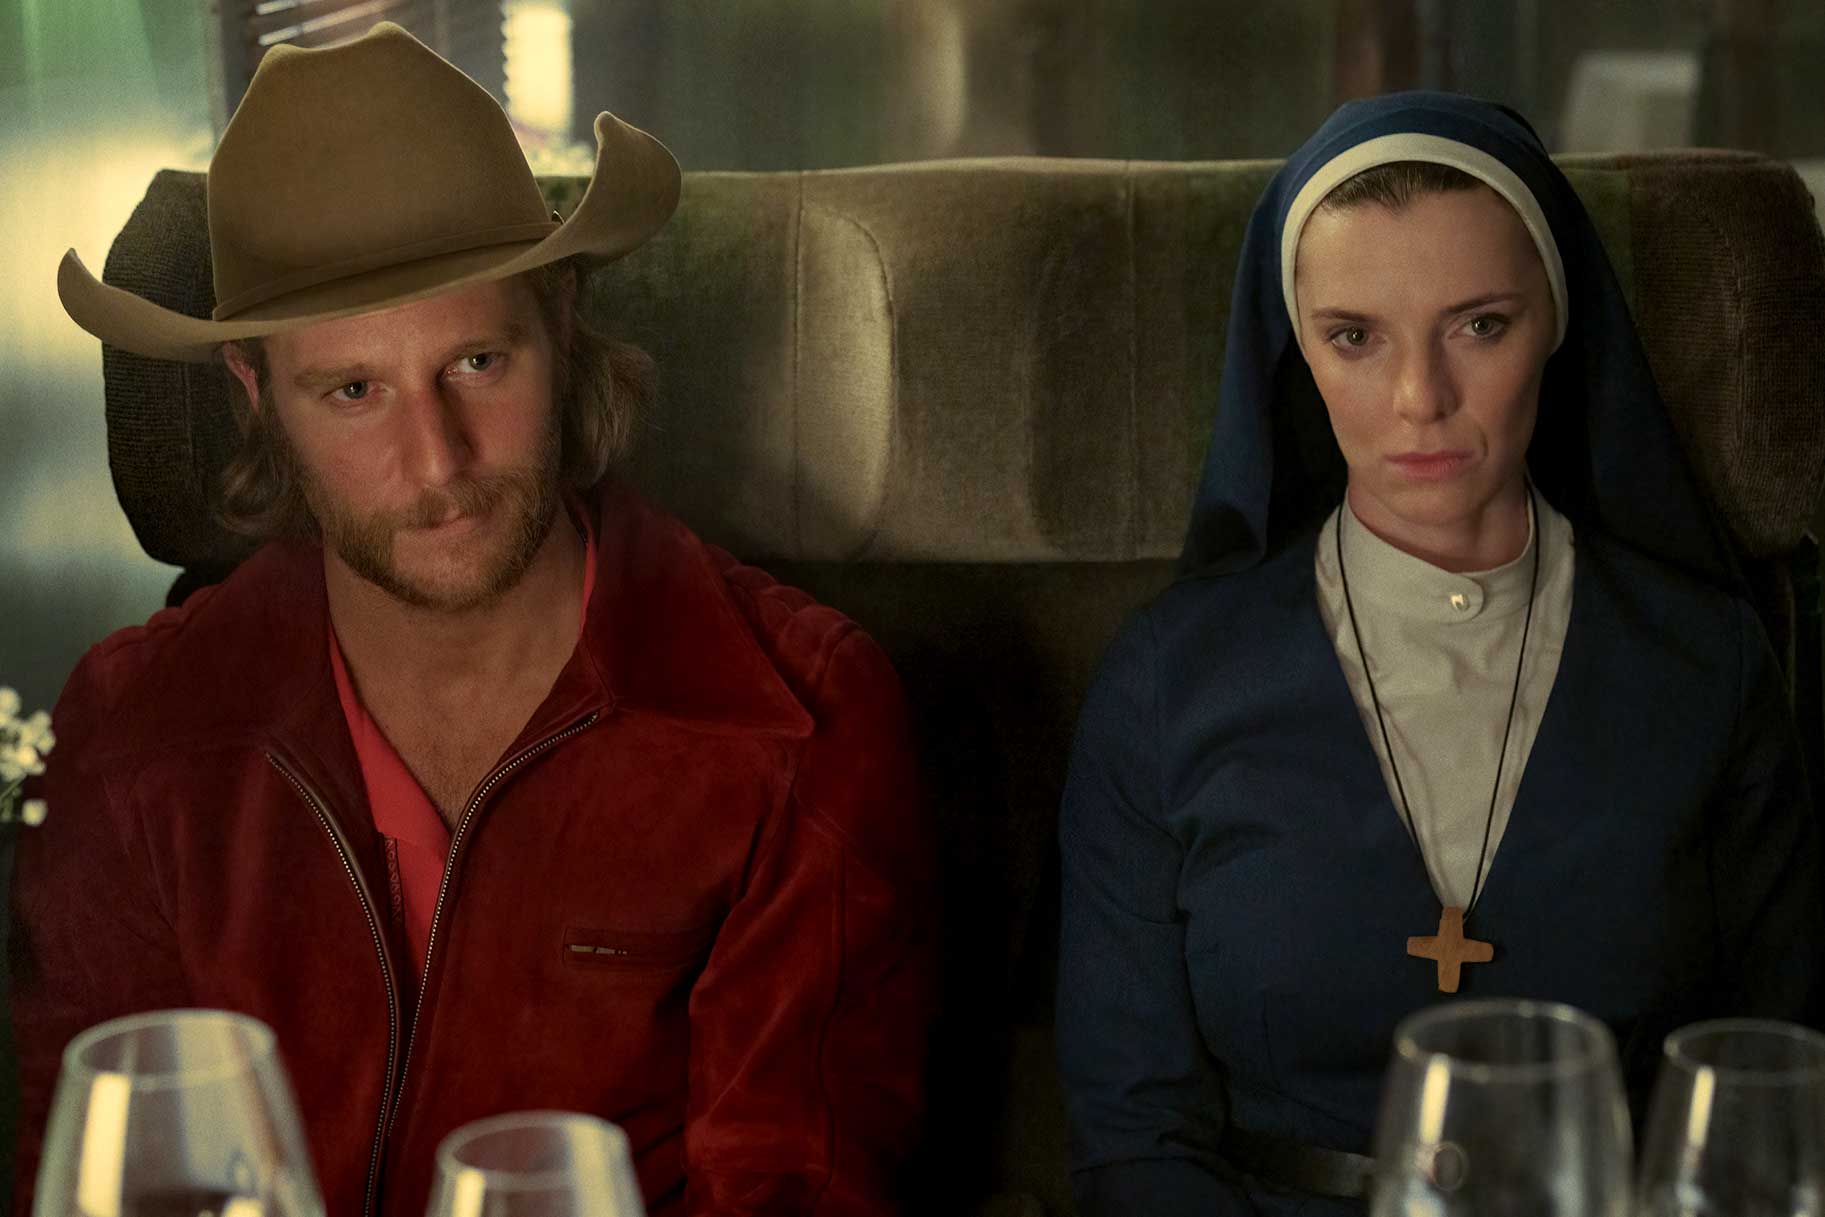 Jake McDorman as Wiley and Betty Gilpin as Simone sit next to each other with serious expressions on Mrs. Davis